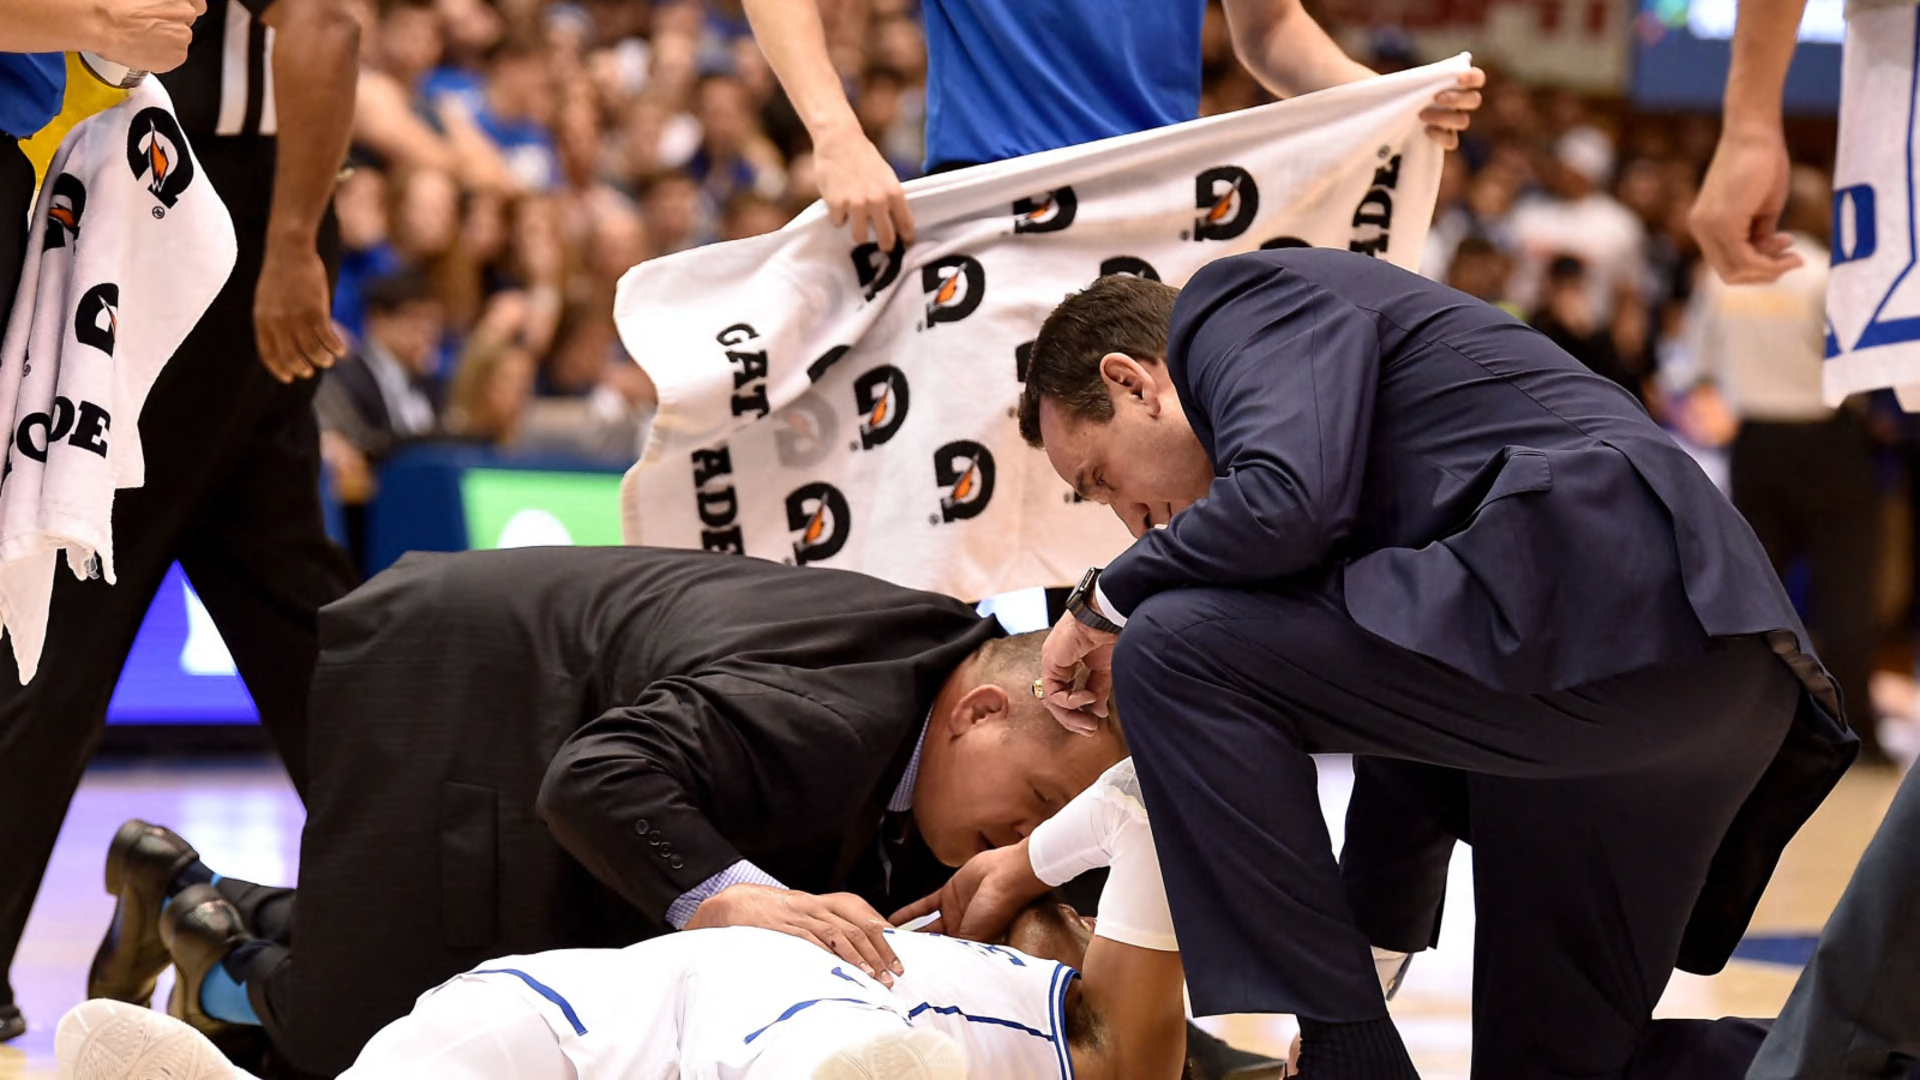 One early injury could send Duke basketball team into free fall